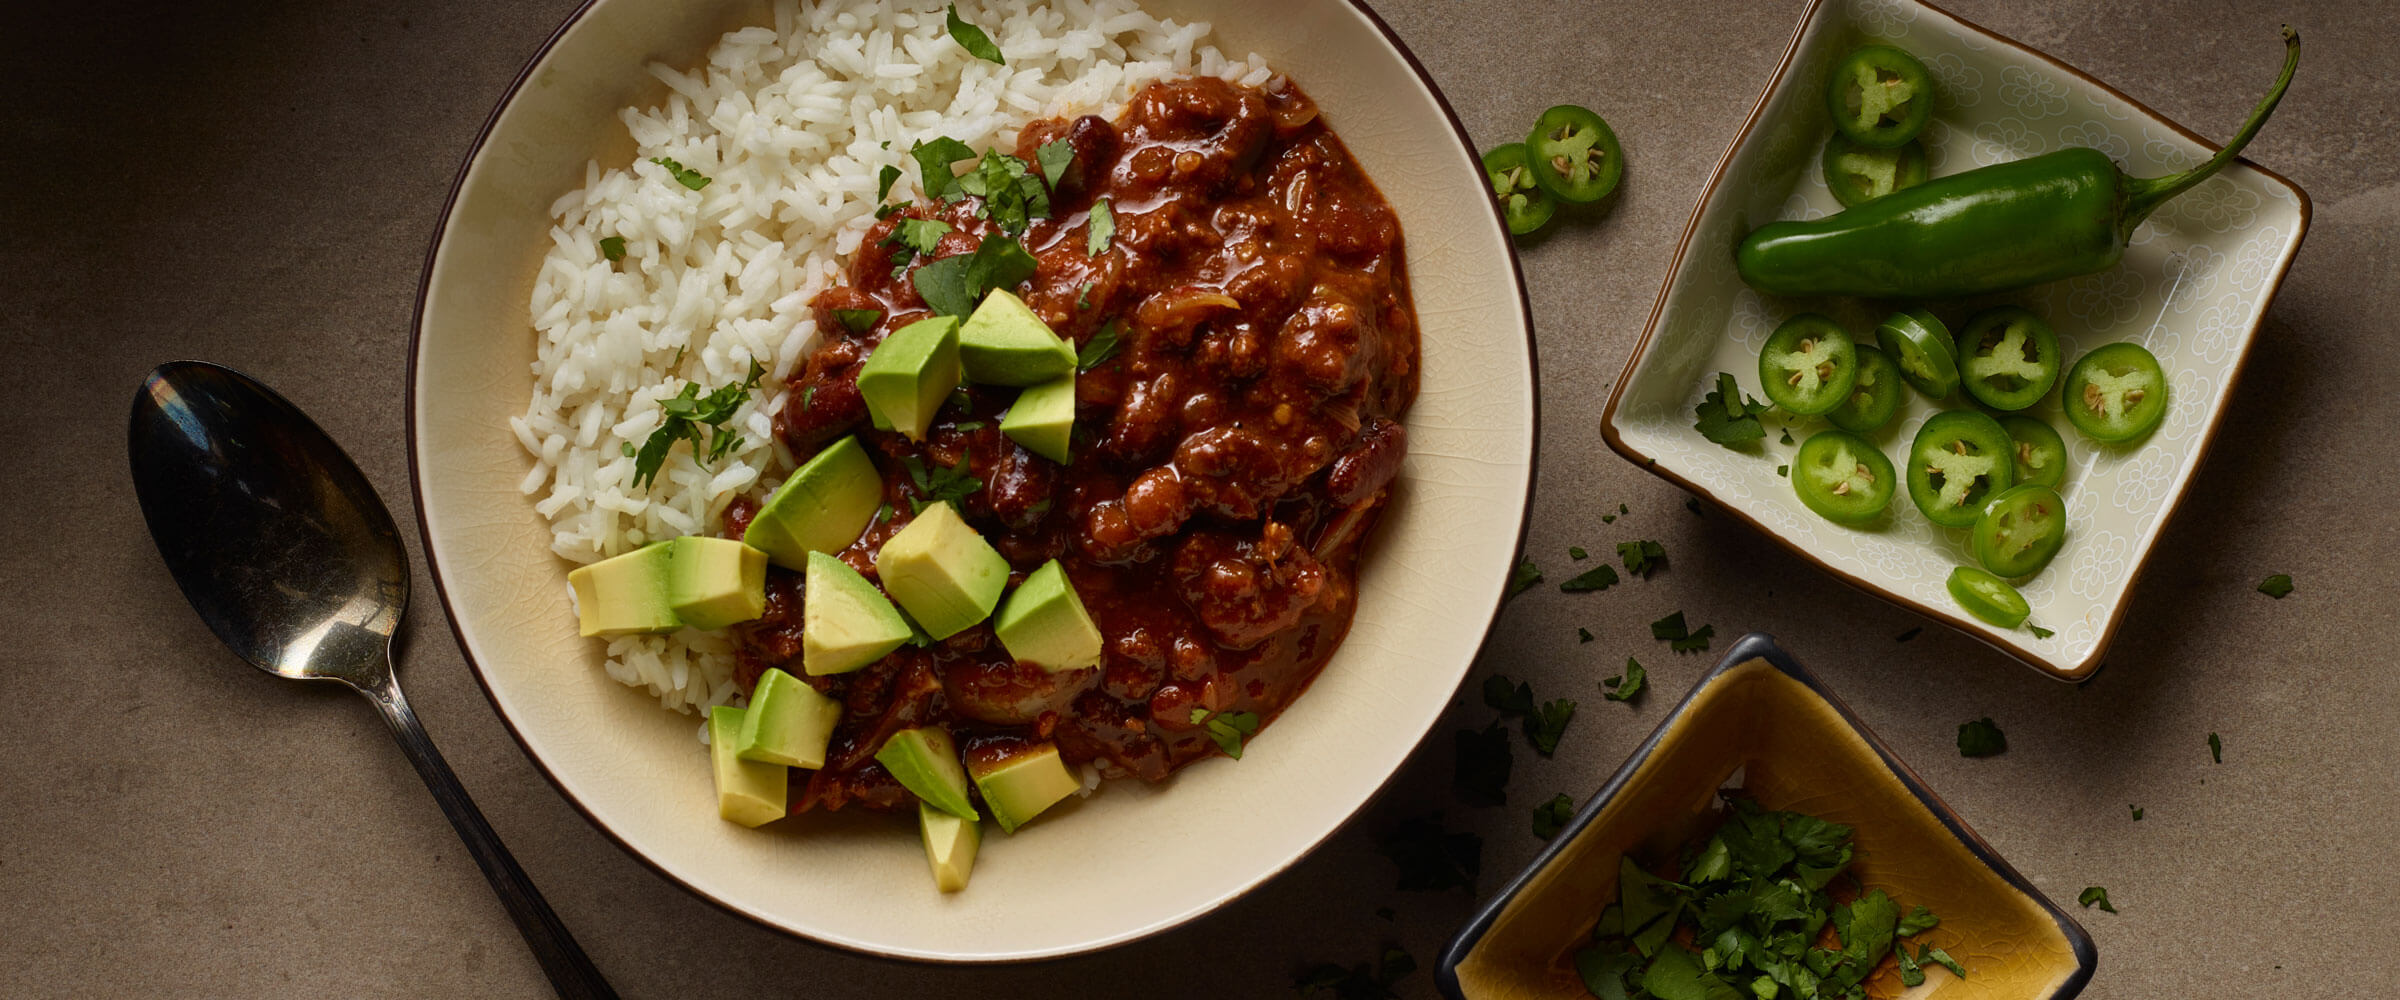 Bowl of chinese chili over rice topped with avocado and cilantro with dish of extra jalapeno slices